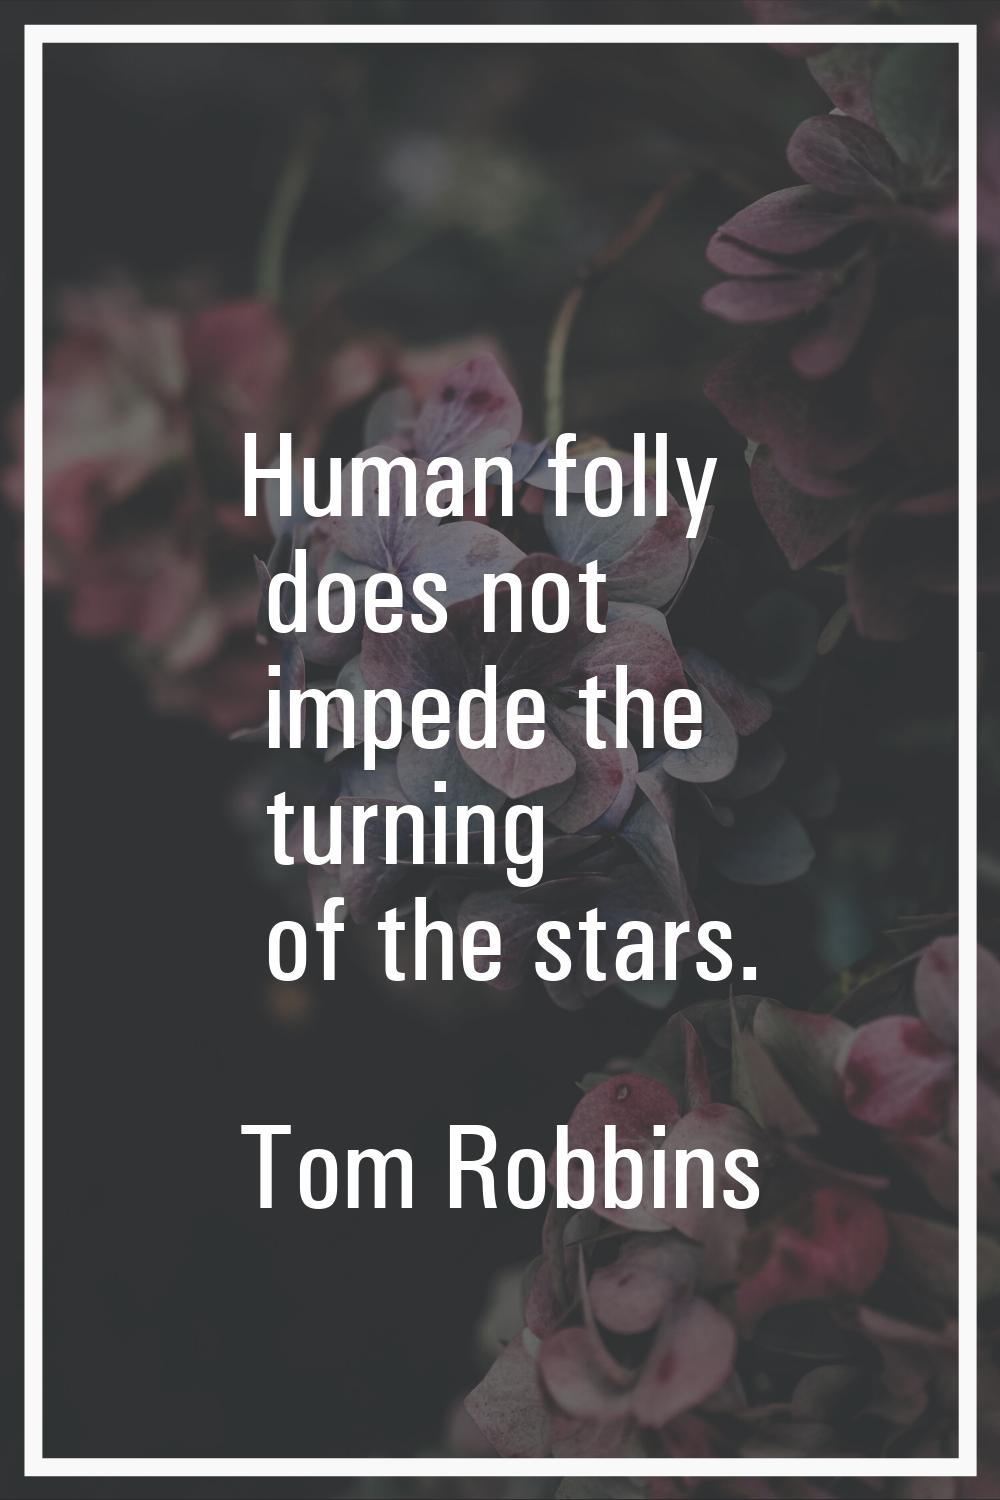 Human folly does not impede the turning of the stars.